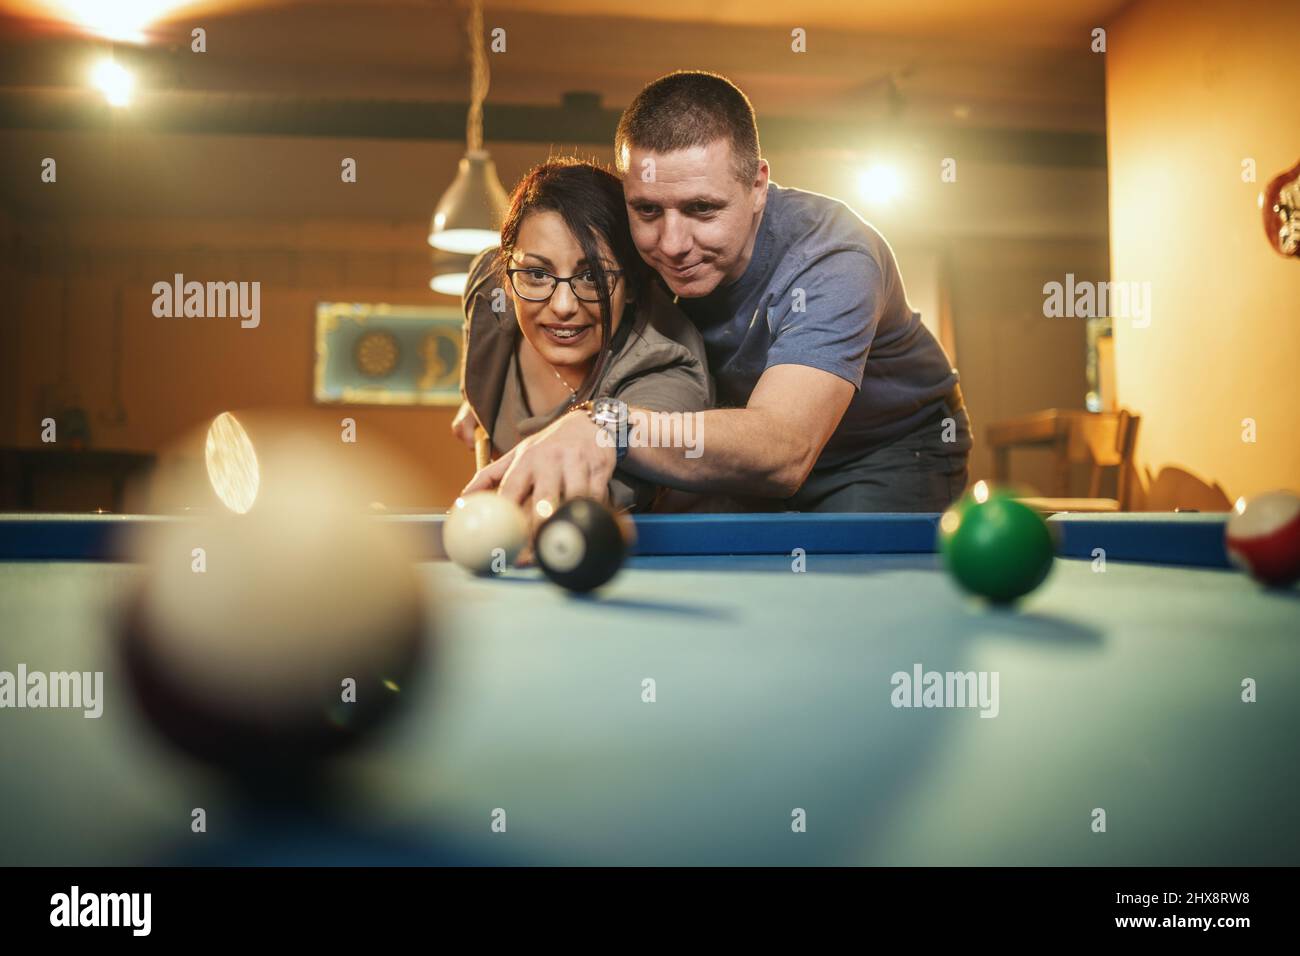 Young smiling cheerful couple is playing billiards in bar after work. They are having fun and involved in recreational activity. Stock Photo